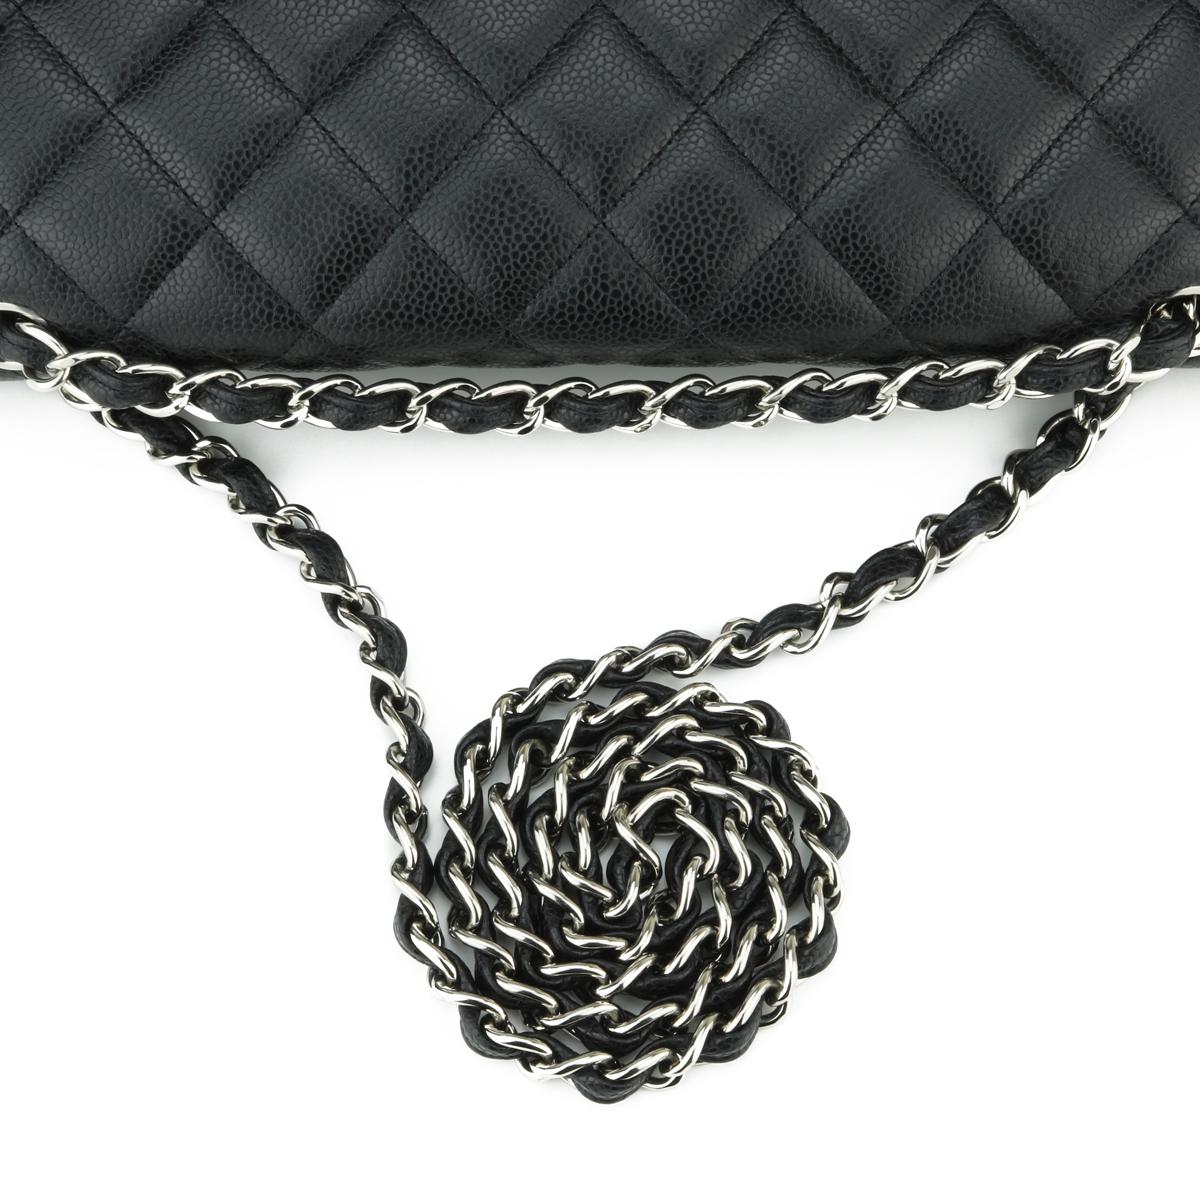 CHANEL Double Flap Maxi Bag Black Caviar with Silver Hardware 2014 For Sale 7